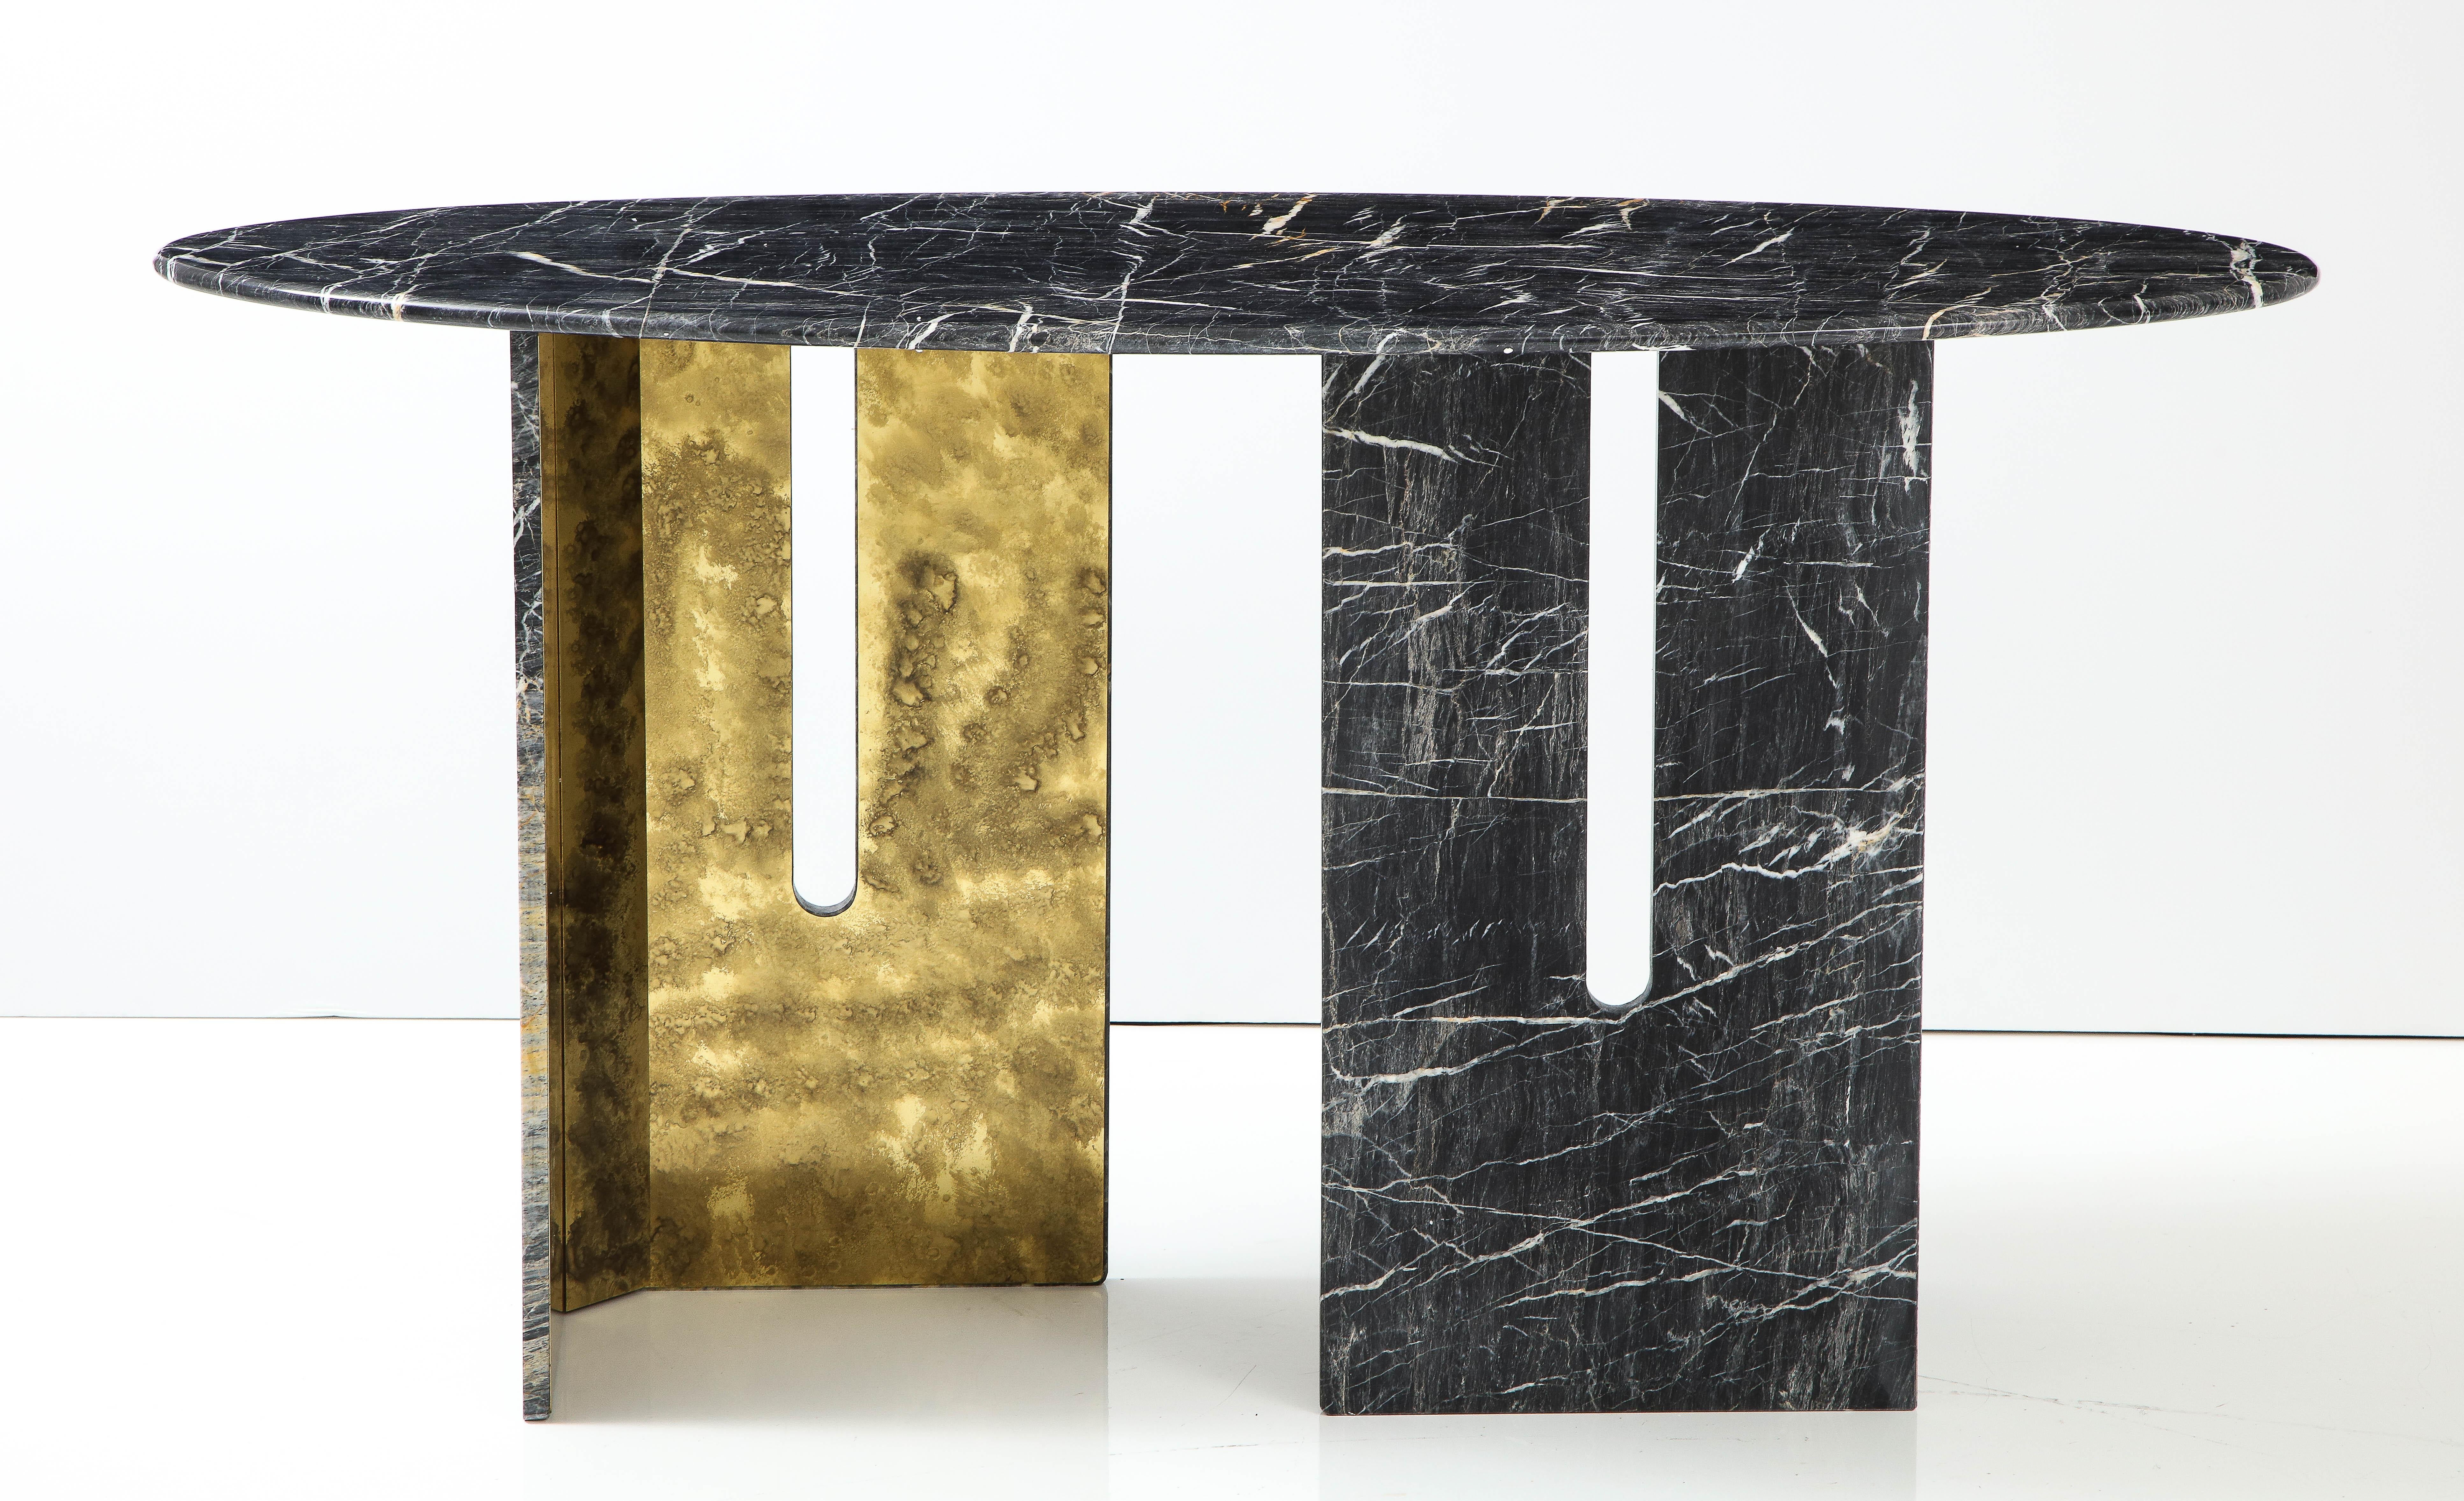 One-of-a-kind pair of Saint Laurent black and grey with White Veins marble Consoles Tables. Oval-shaped, polished marble slabs sit atop geometric bases that are set in an asymmetrical arrangement. Legs consist of marble on the exterior with oxidized